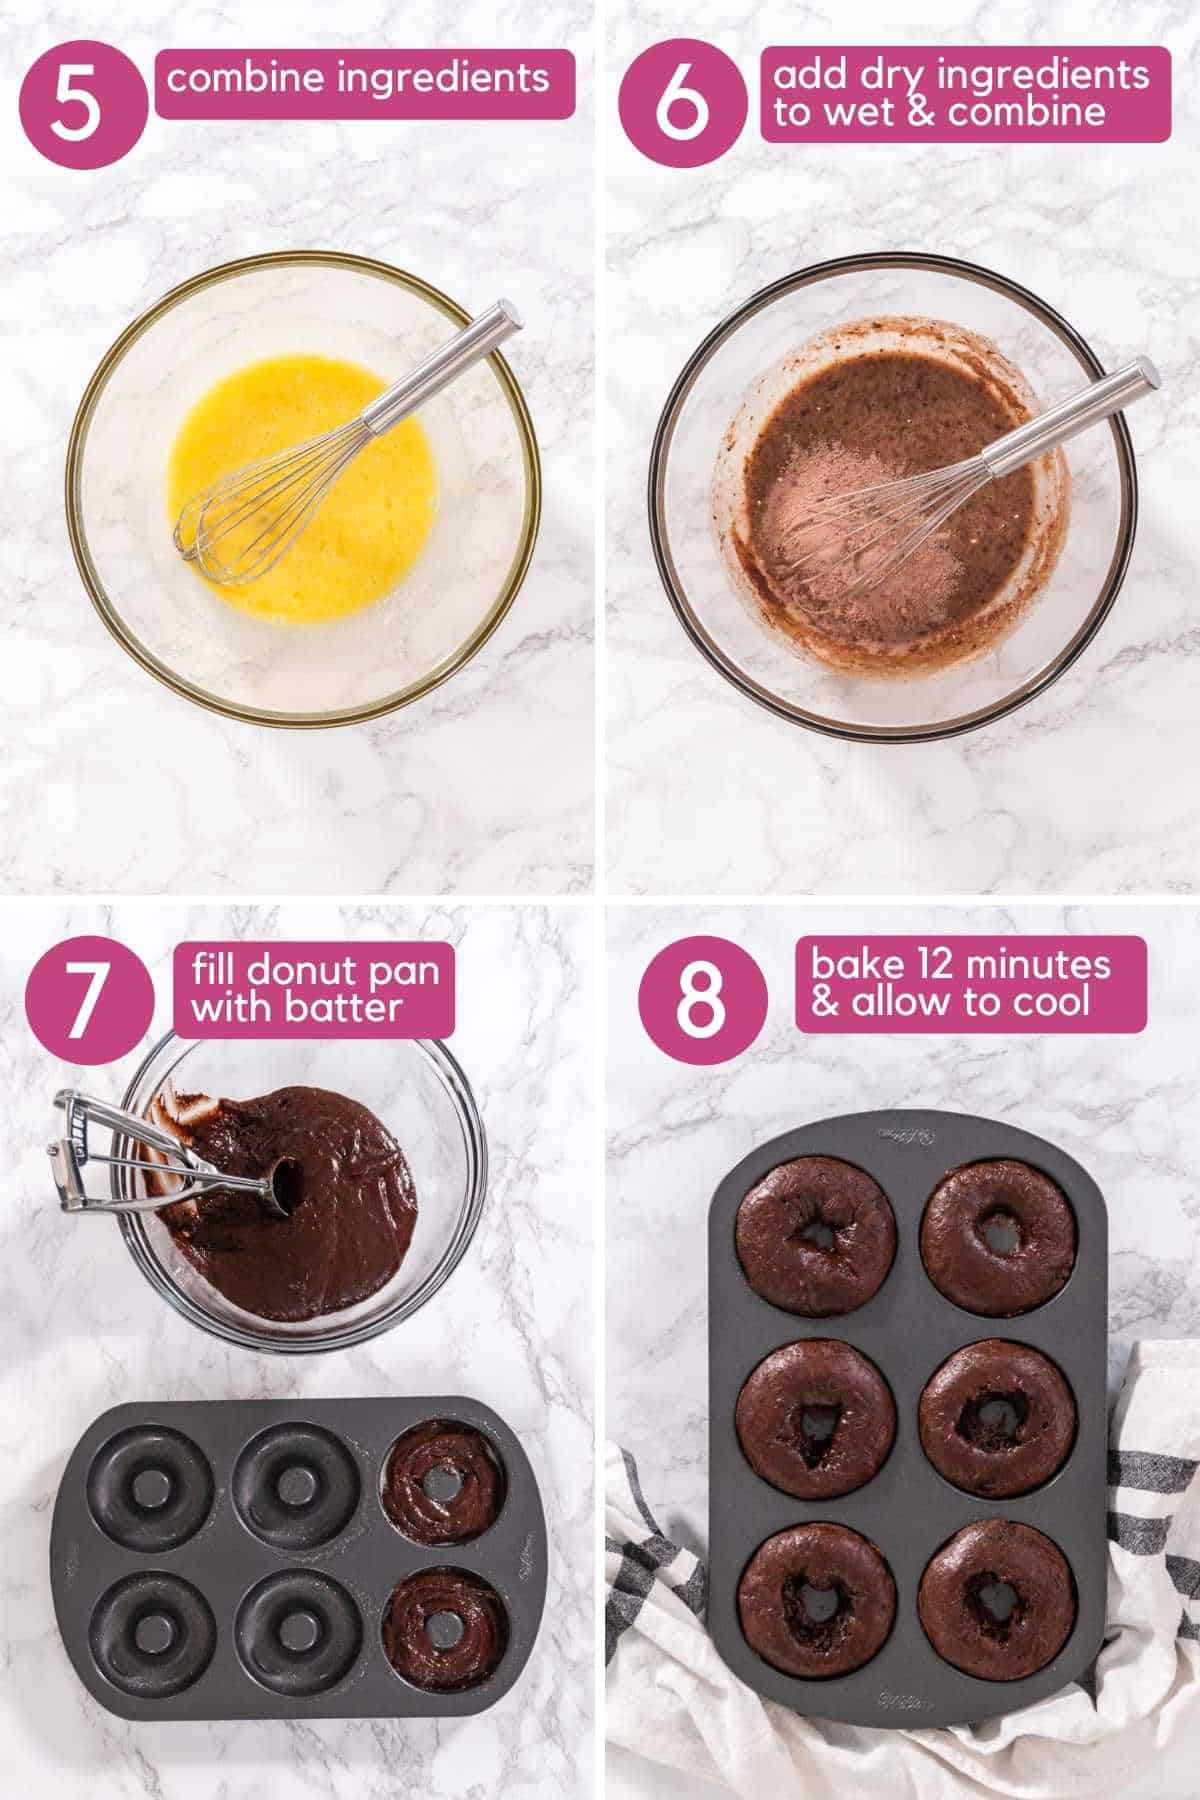 Add to wet ingredients and fill donut pan for chocolate protein donuts.